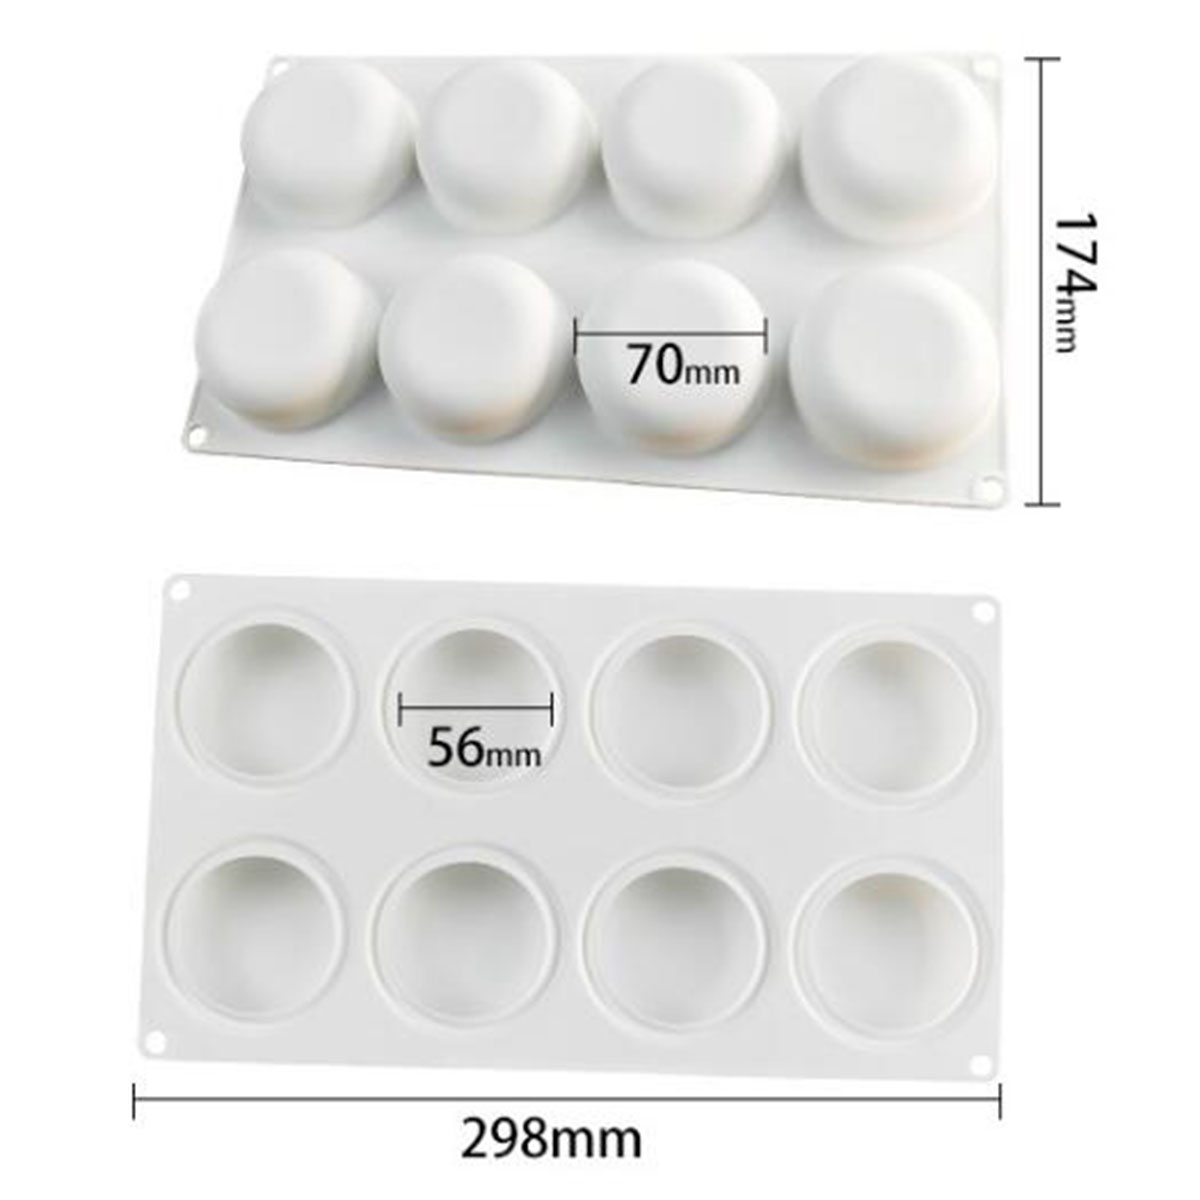 Round-Silicone-DIY-Mousse-Cake-Mold-8-Cavity-Candy-Chocolate-Baking-Mould-Tray-1343042